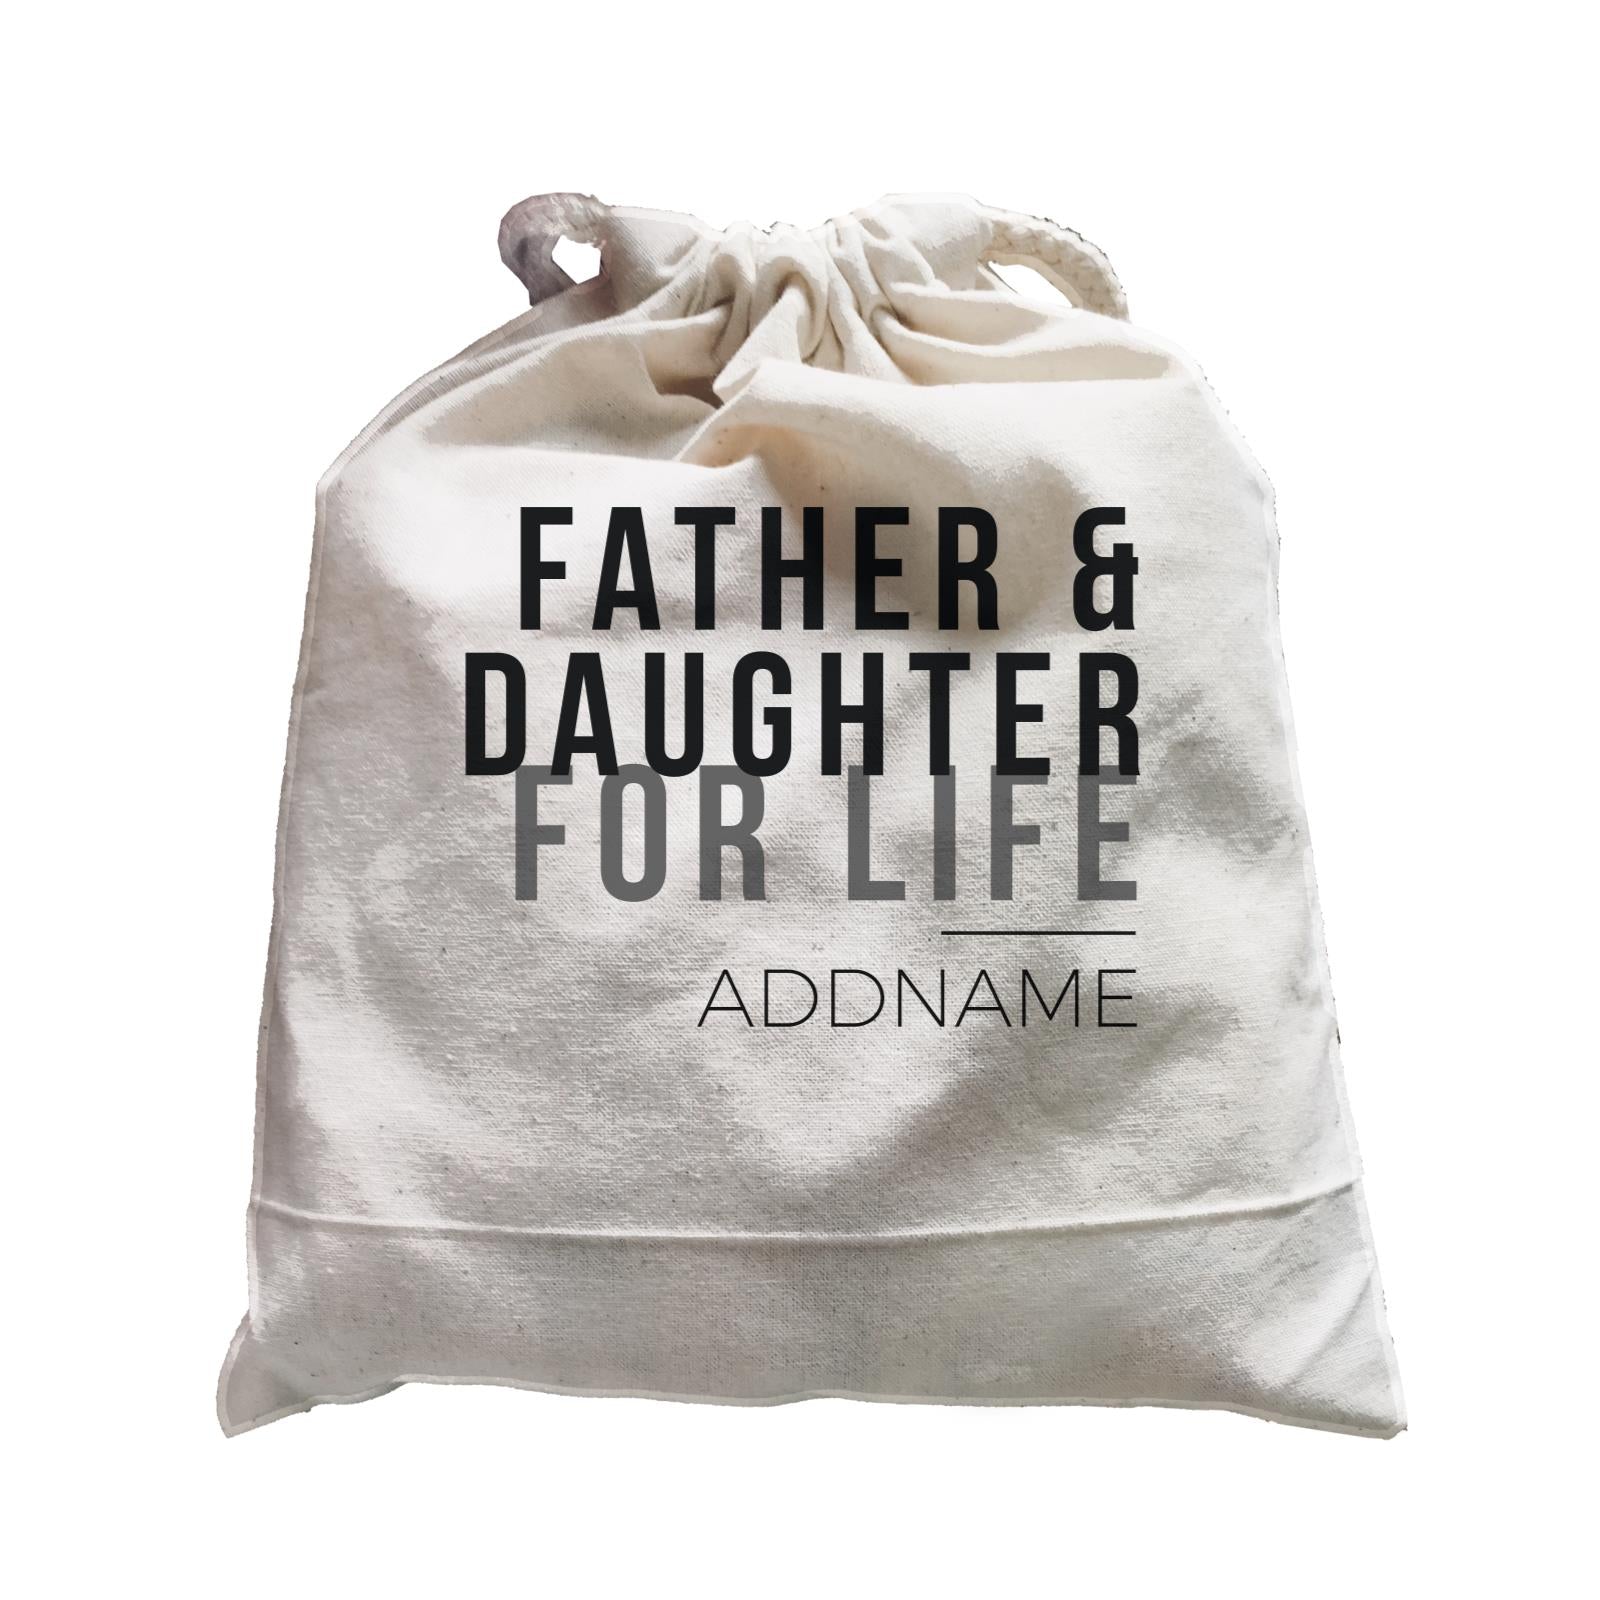 Family For Life Father & Daughter For Life Addname Satchel